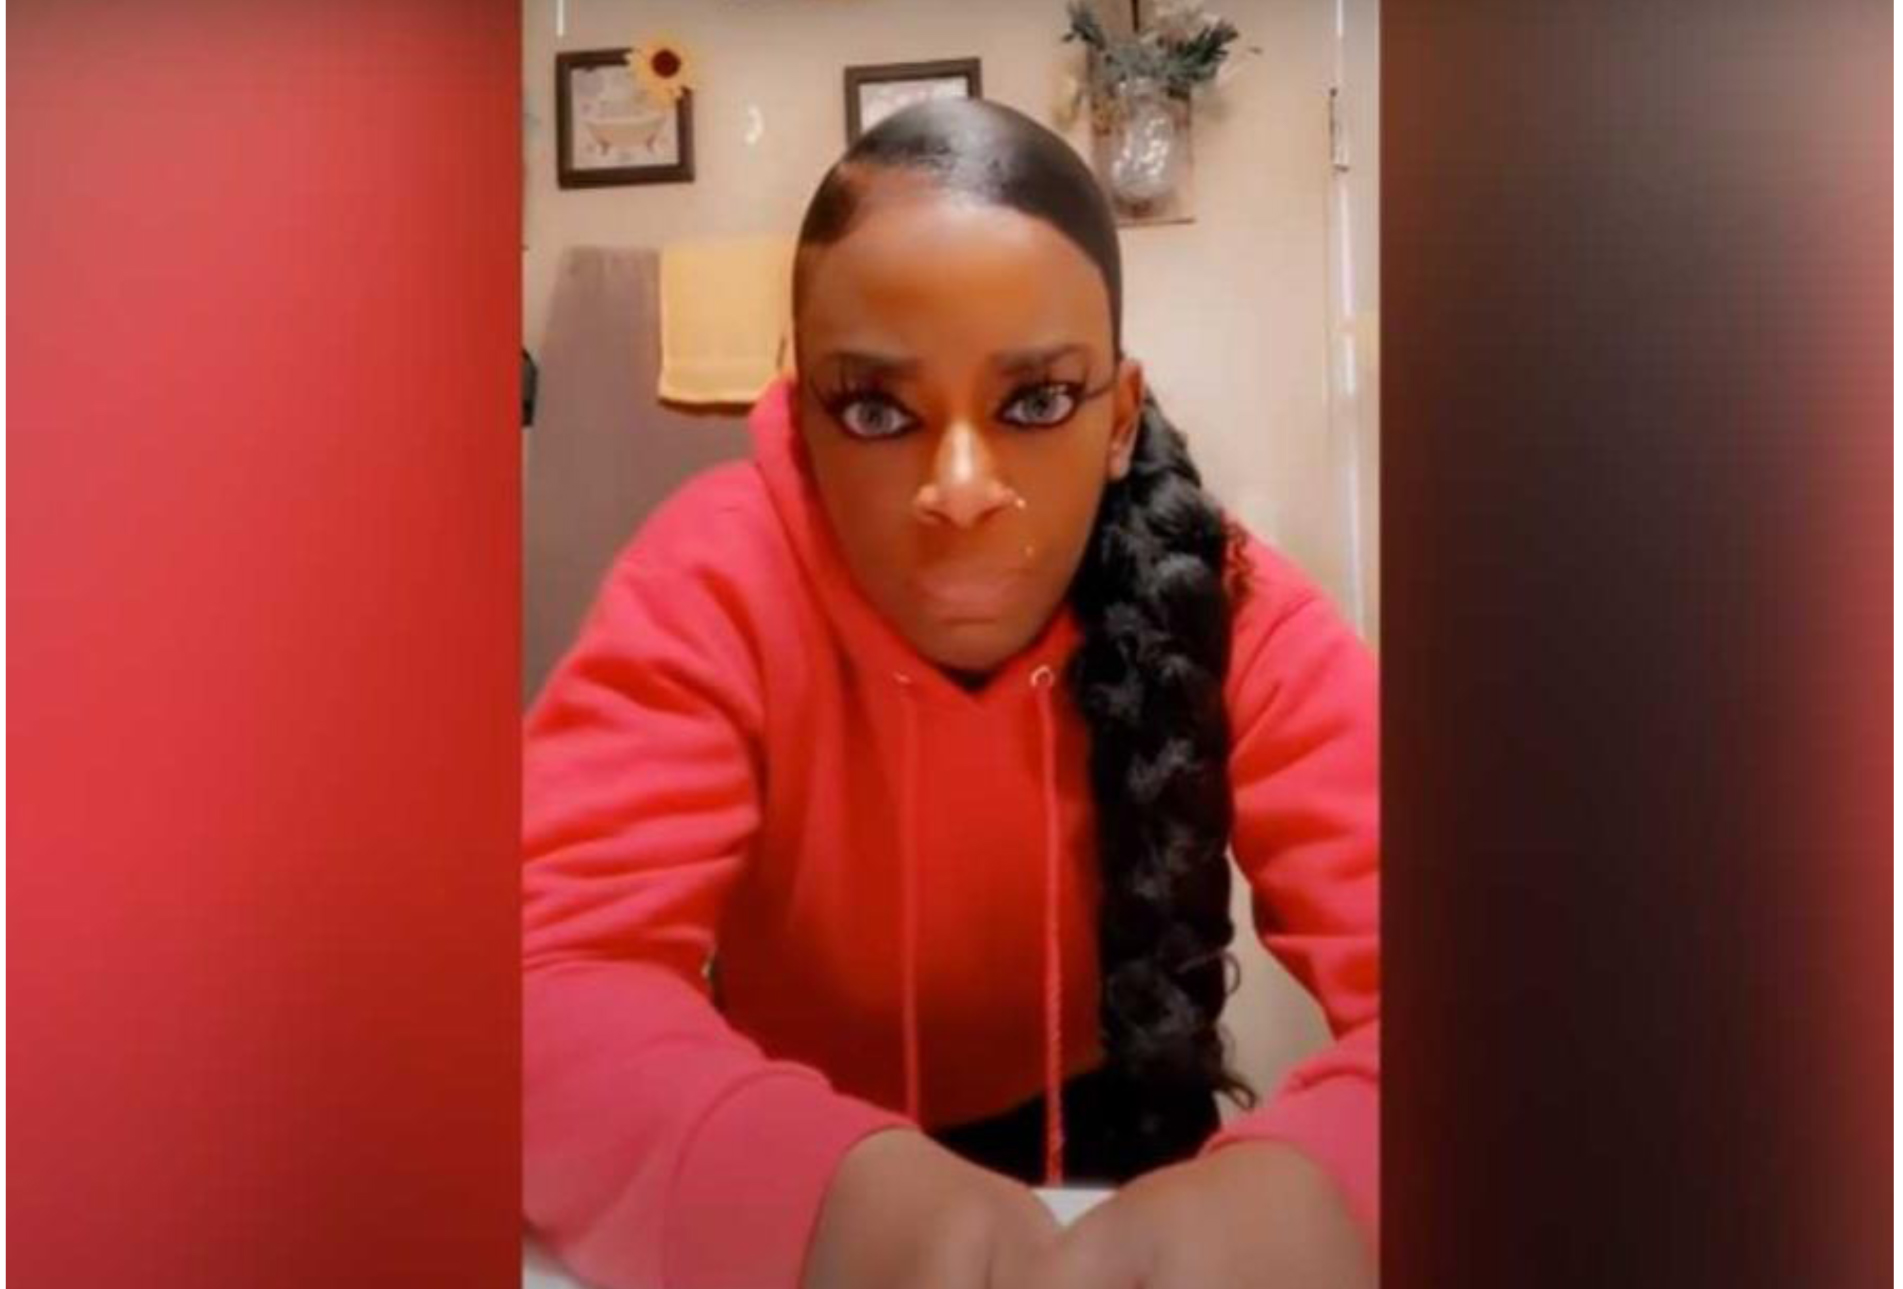 A woman in a red hoodie takes a selfie, questioning if it will bring her clout like the Gorilla Glue Girl and her bad decision.